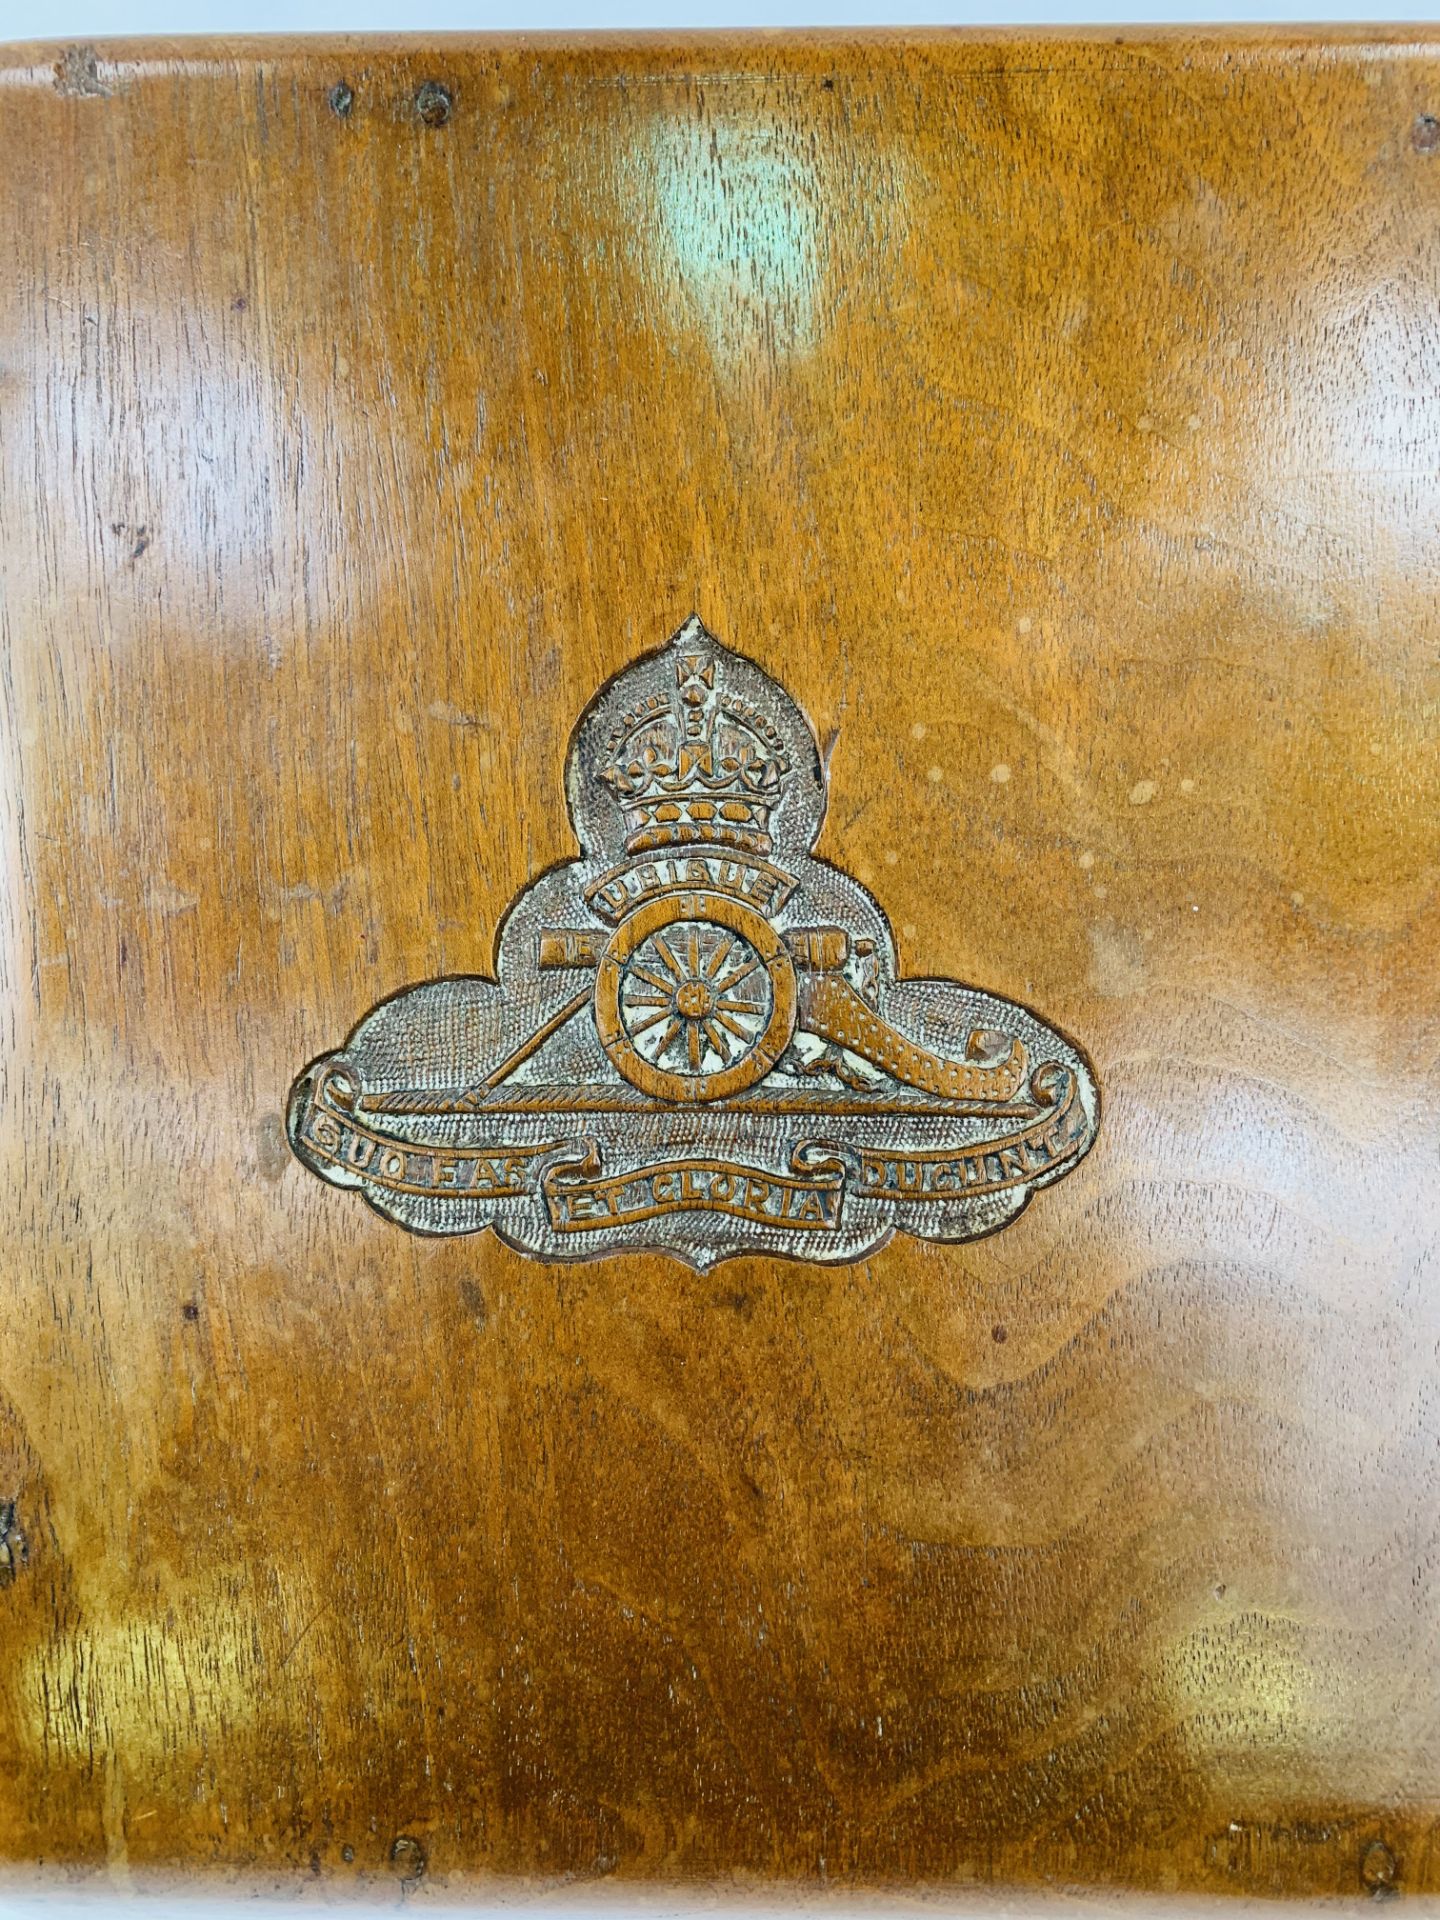 Mahogany stationery box carved with the crest of the Royal Artillery - Image 4 of 4